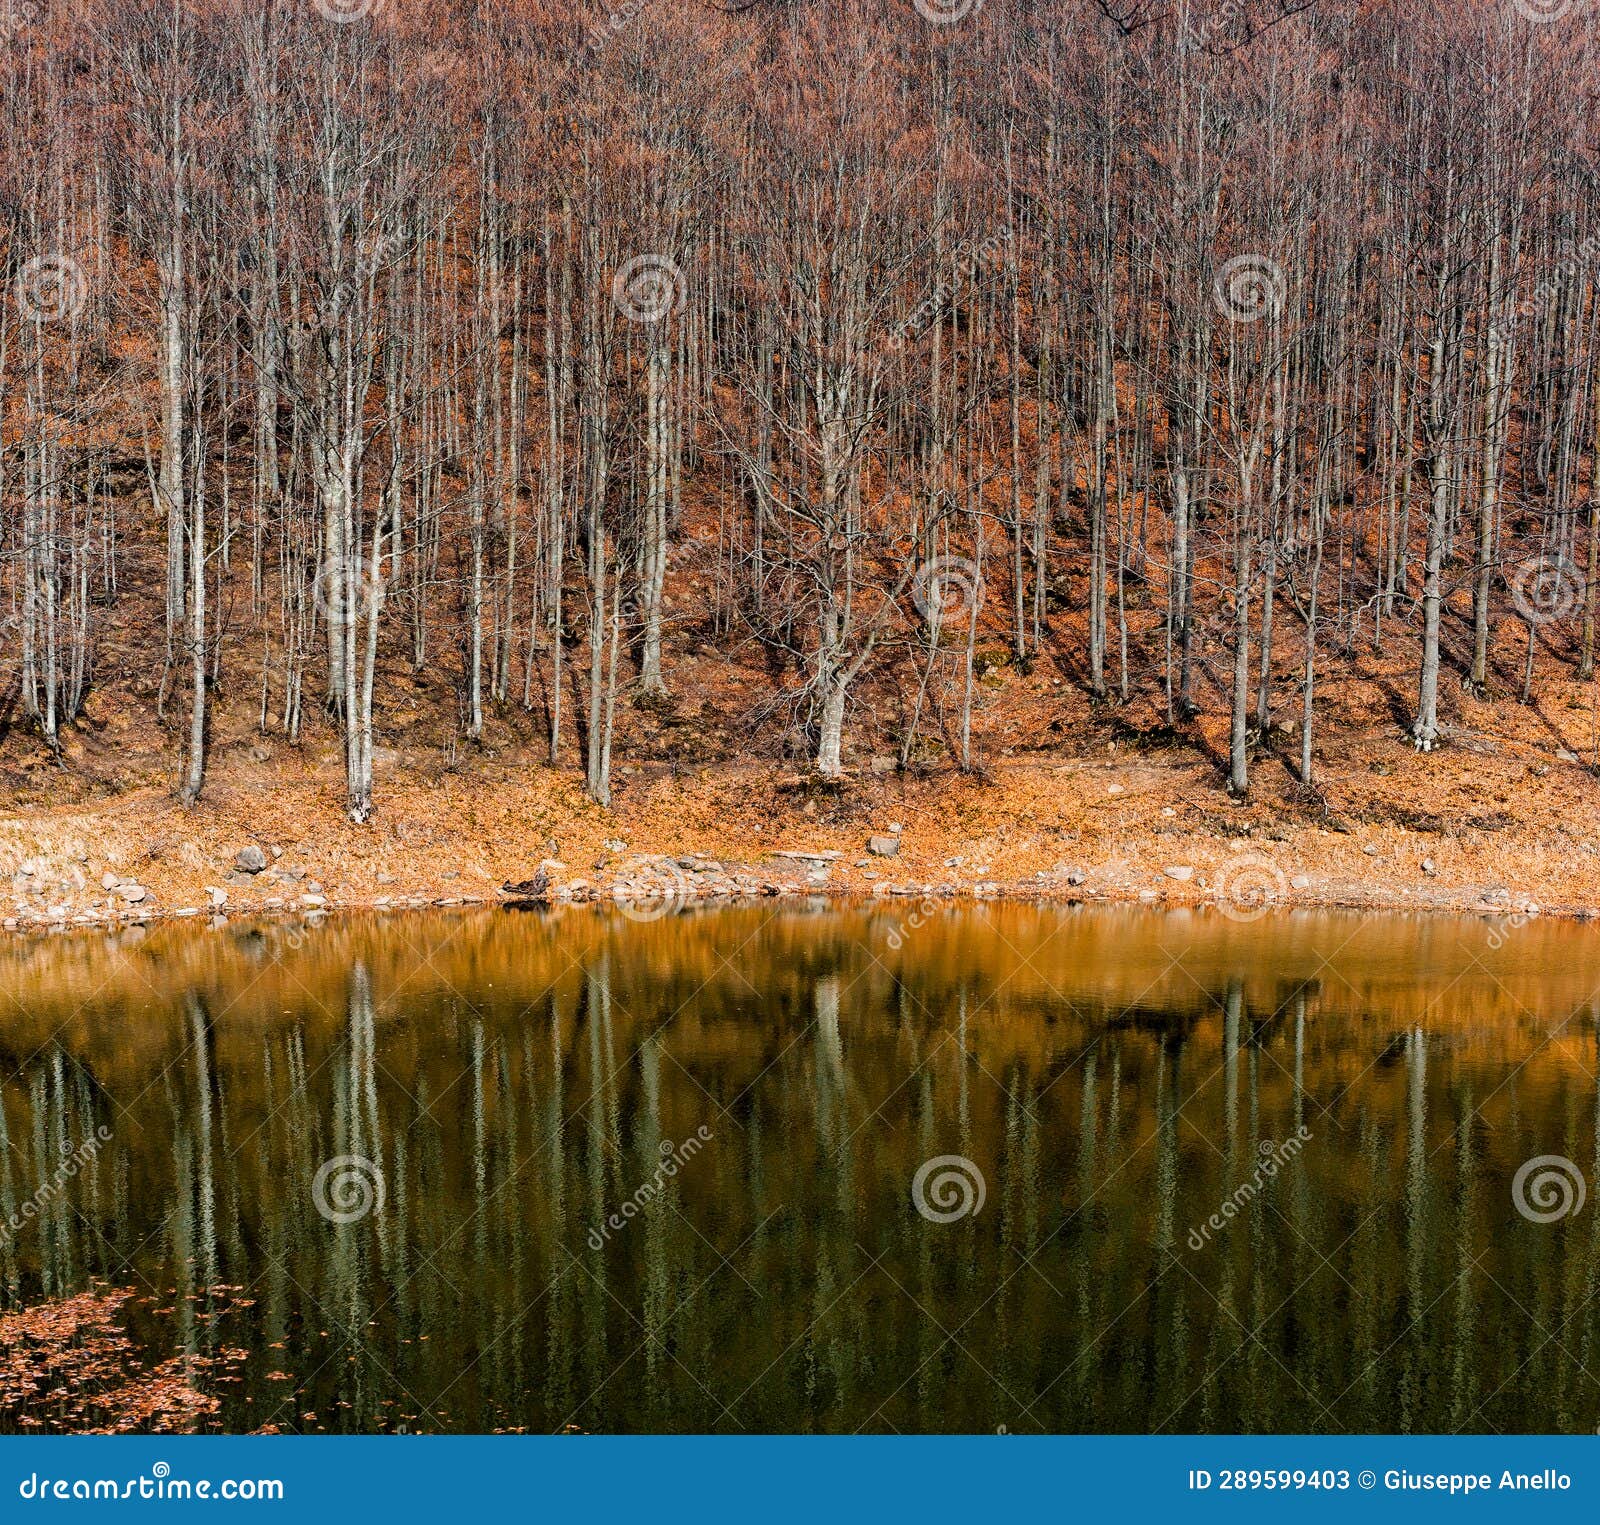 scenic view of lake by trees against sky, lago scuro, ventasso